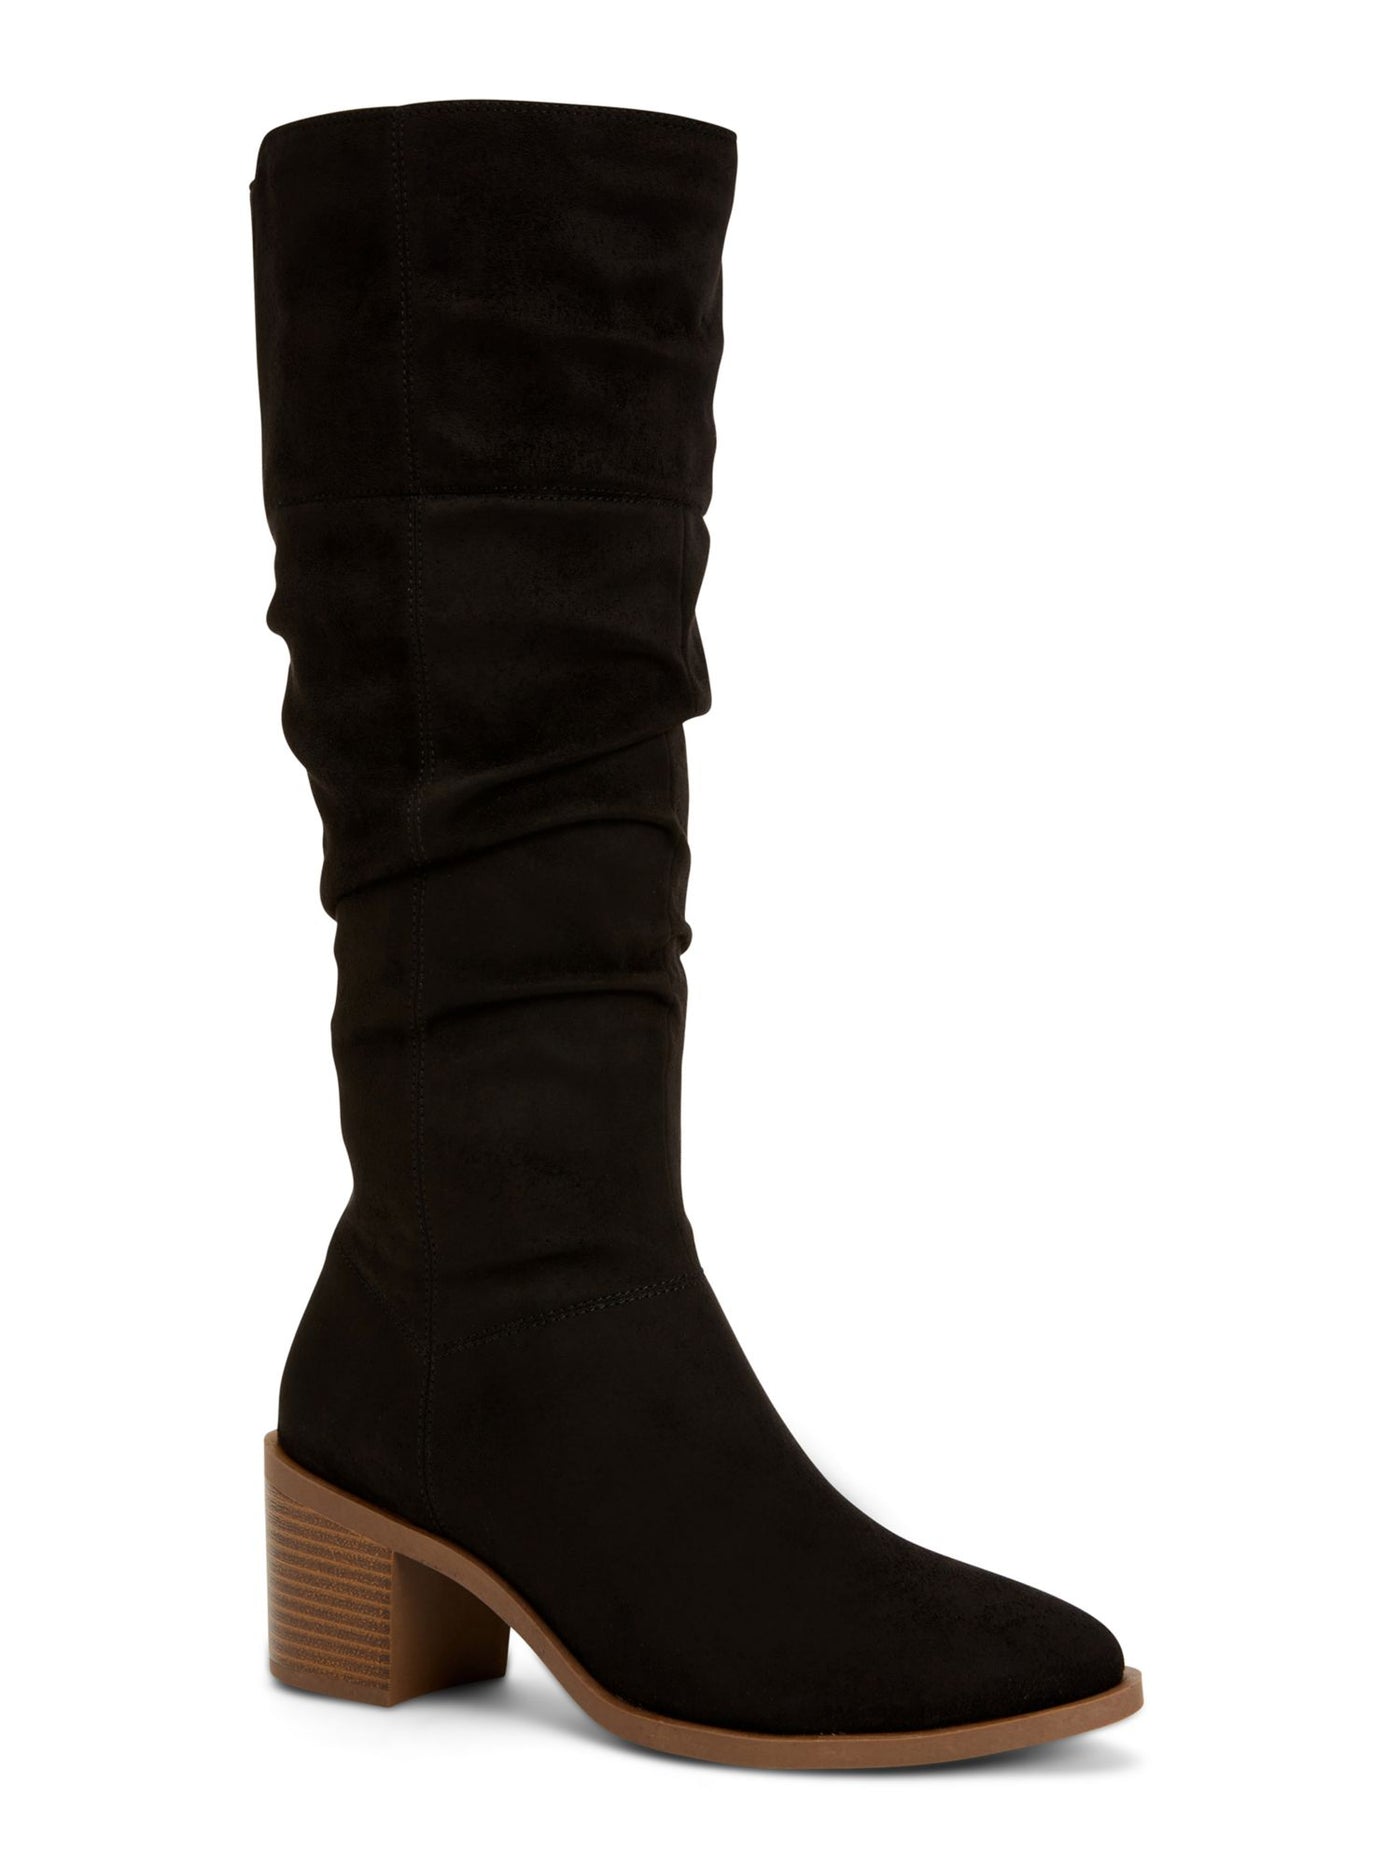 STYLE & COMPANY Womens Black Almond Toe Stacked Heel Zip-Up Dress Boots 11